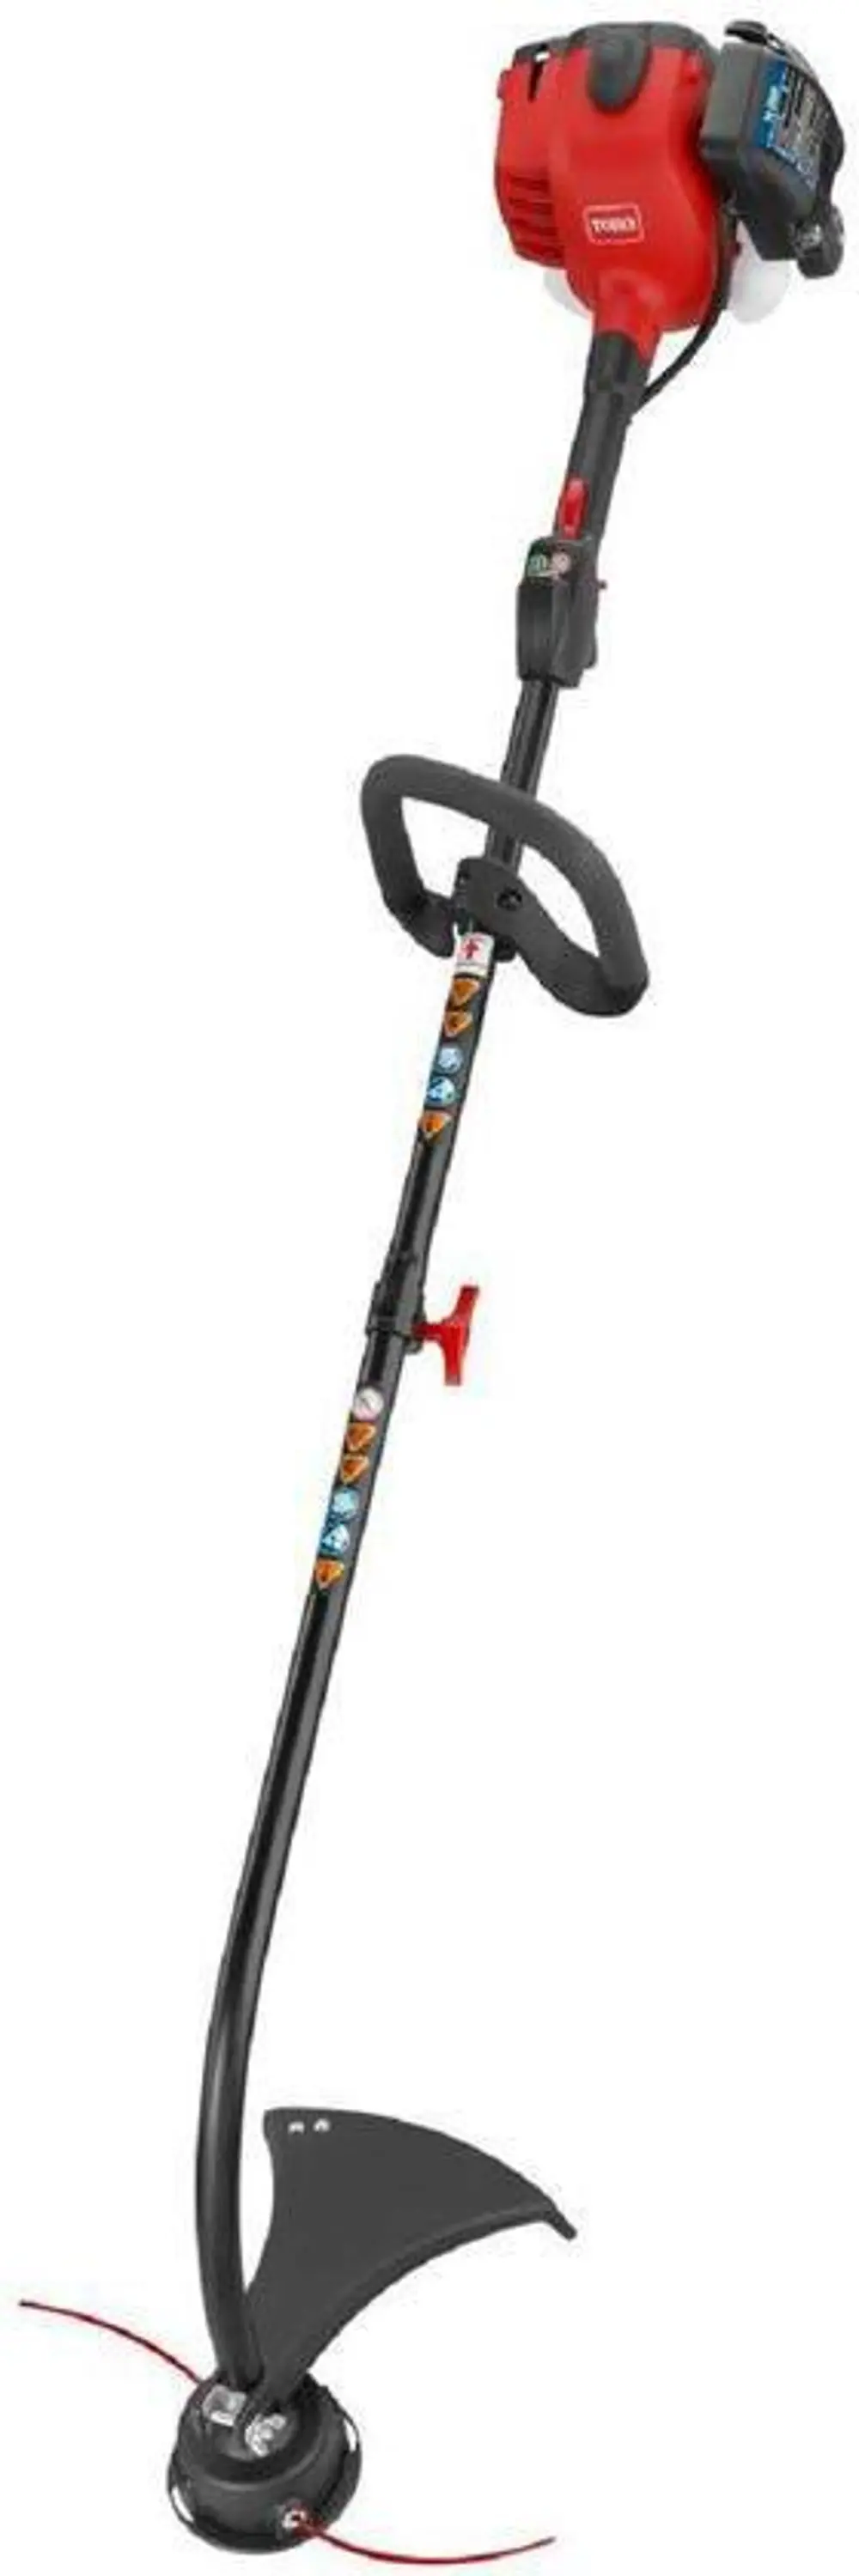 51958 Toro 17 Inch Curved Shaft Gas Trimmer-1